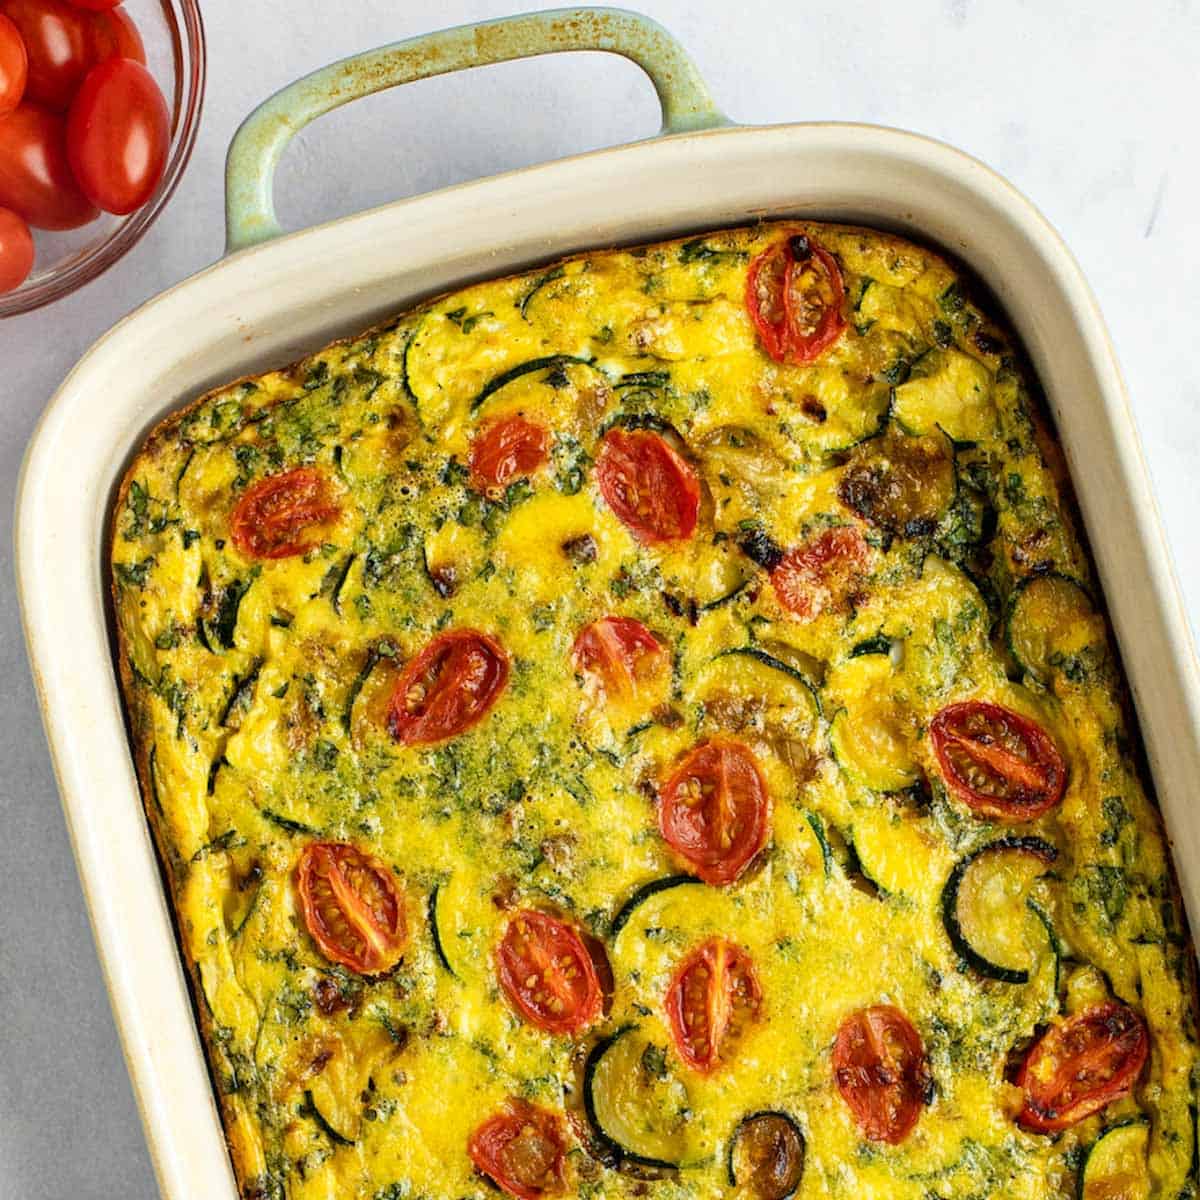 Baked Italian frittata with zucchini and tomatoes.